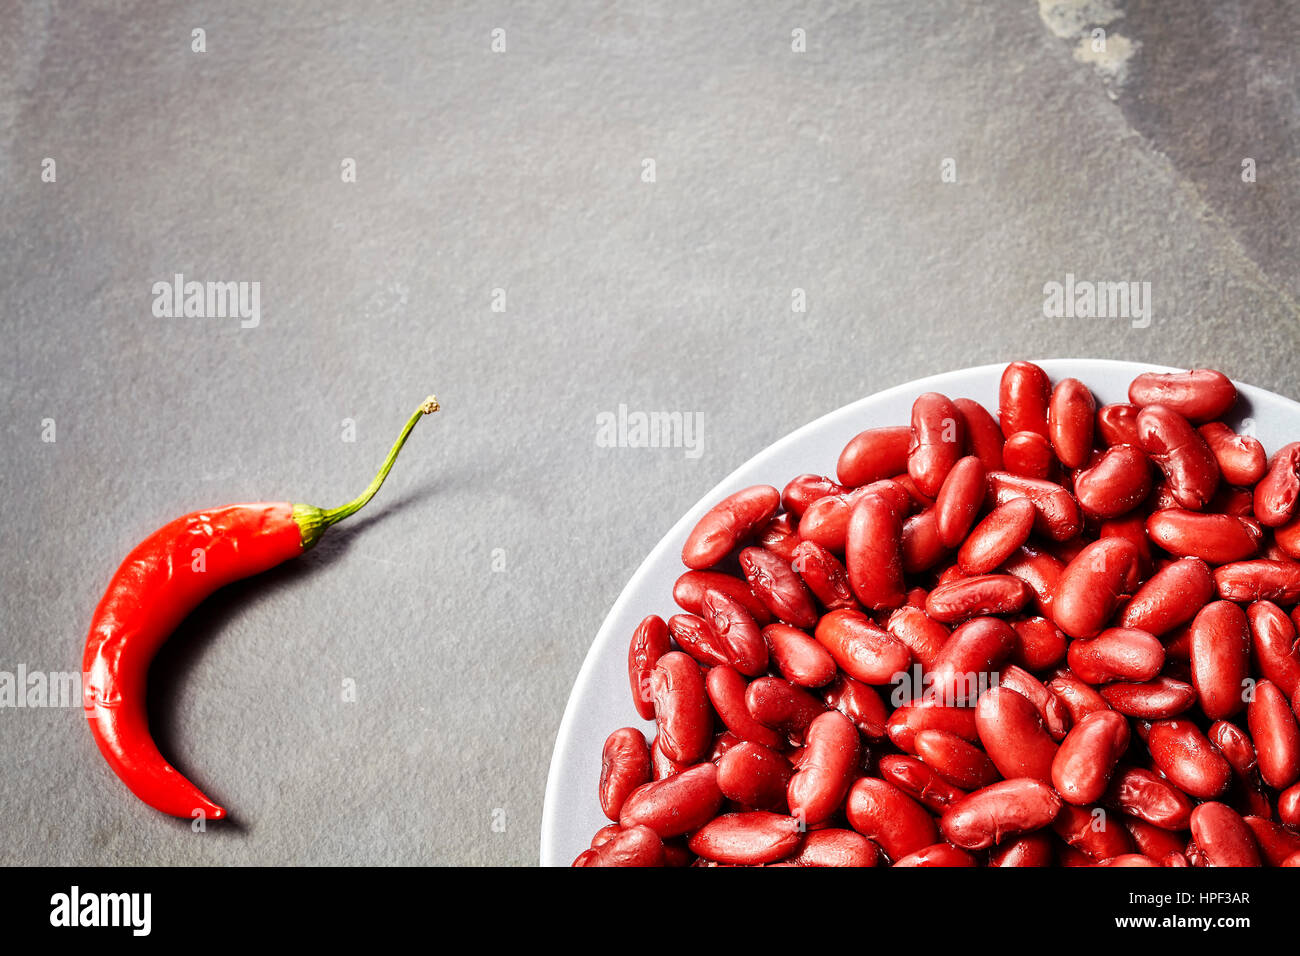 Red kidney bean plate and red chili on slate background, selective focus, copy space. Stock Photo